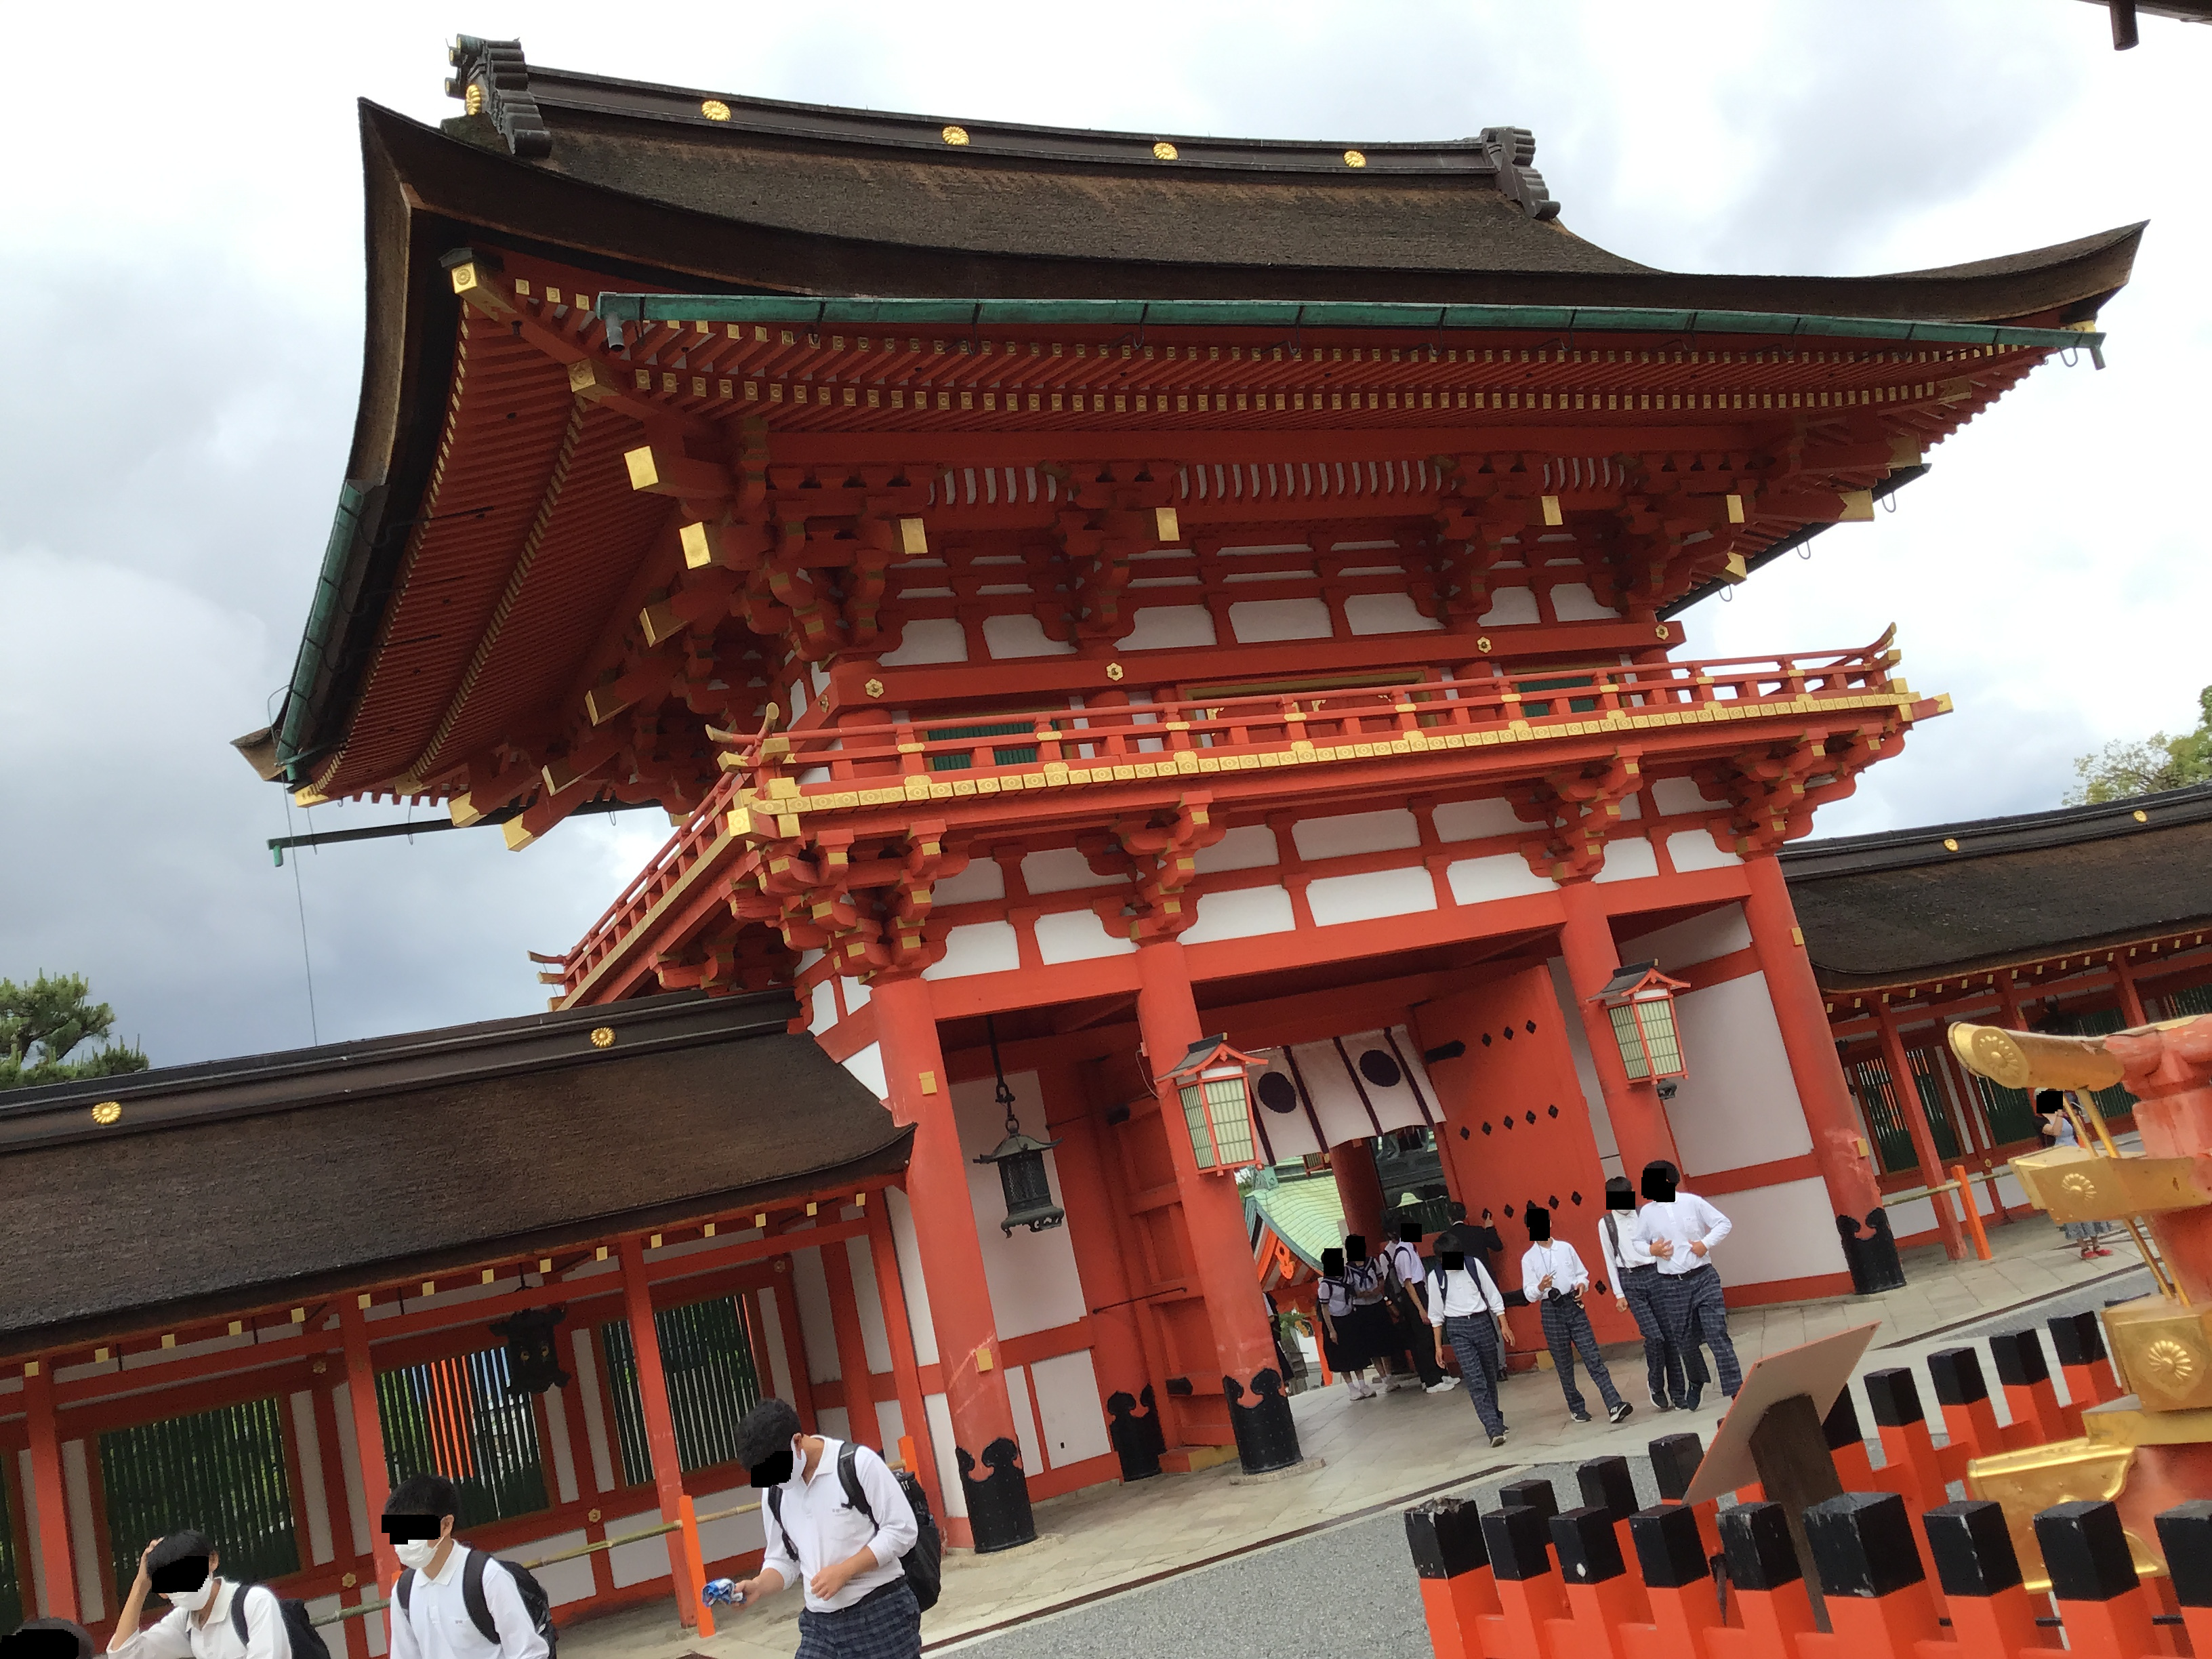 The main building of the torii gate temple in Kyoto